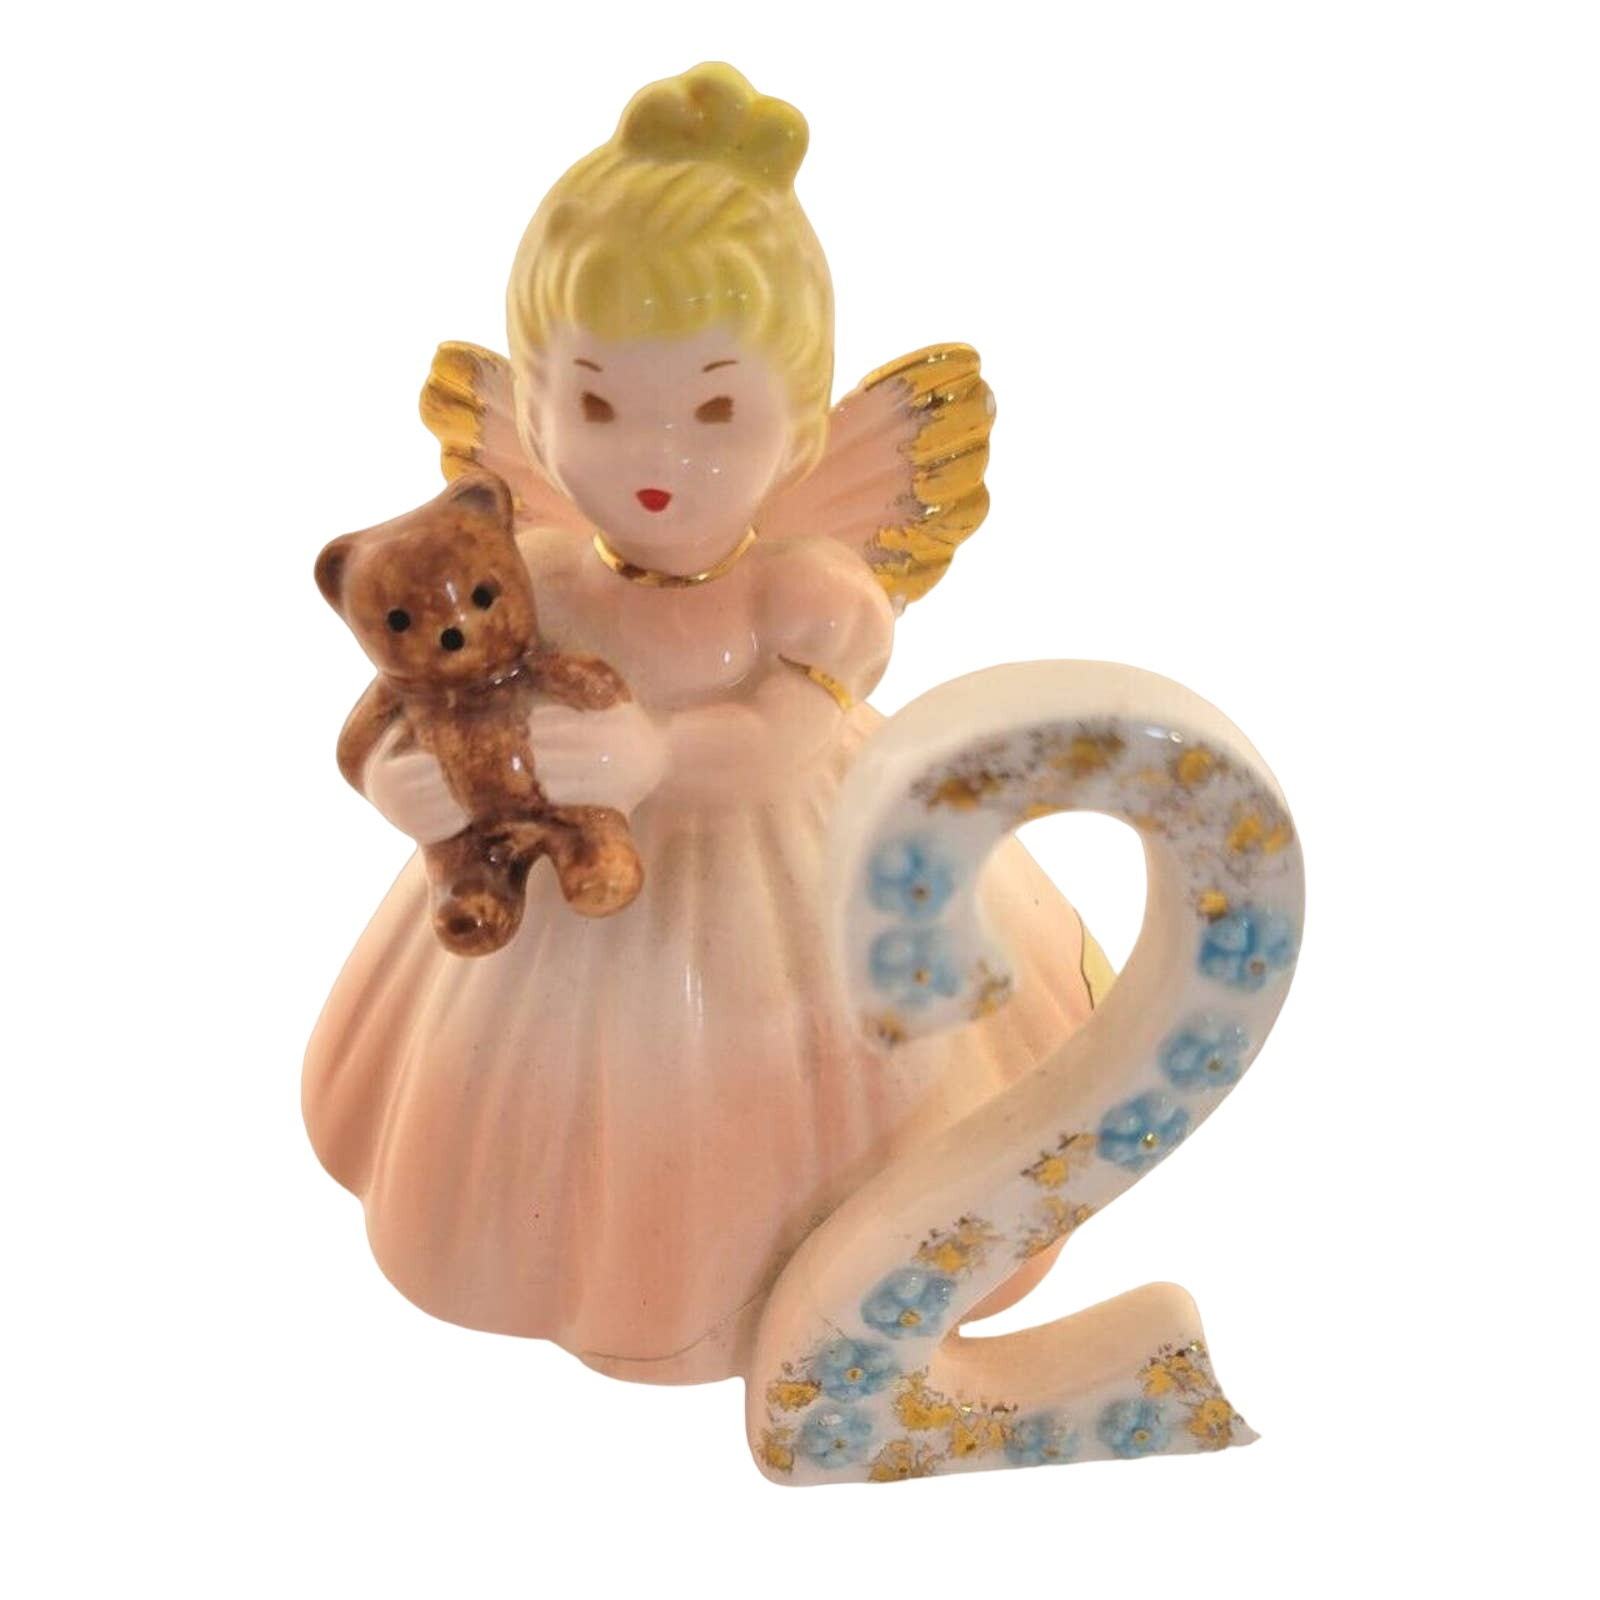 Primary image for Birthday Angel Girl Porcelain Figurine for AGE 2 years old Josef Original